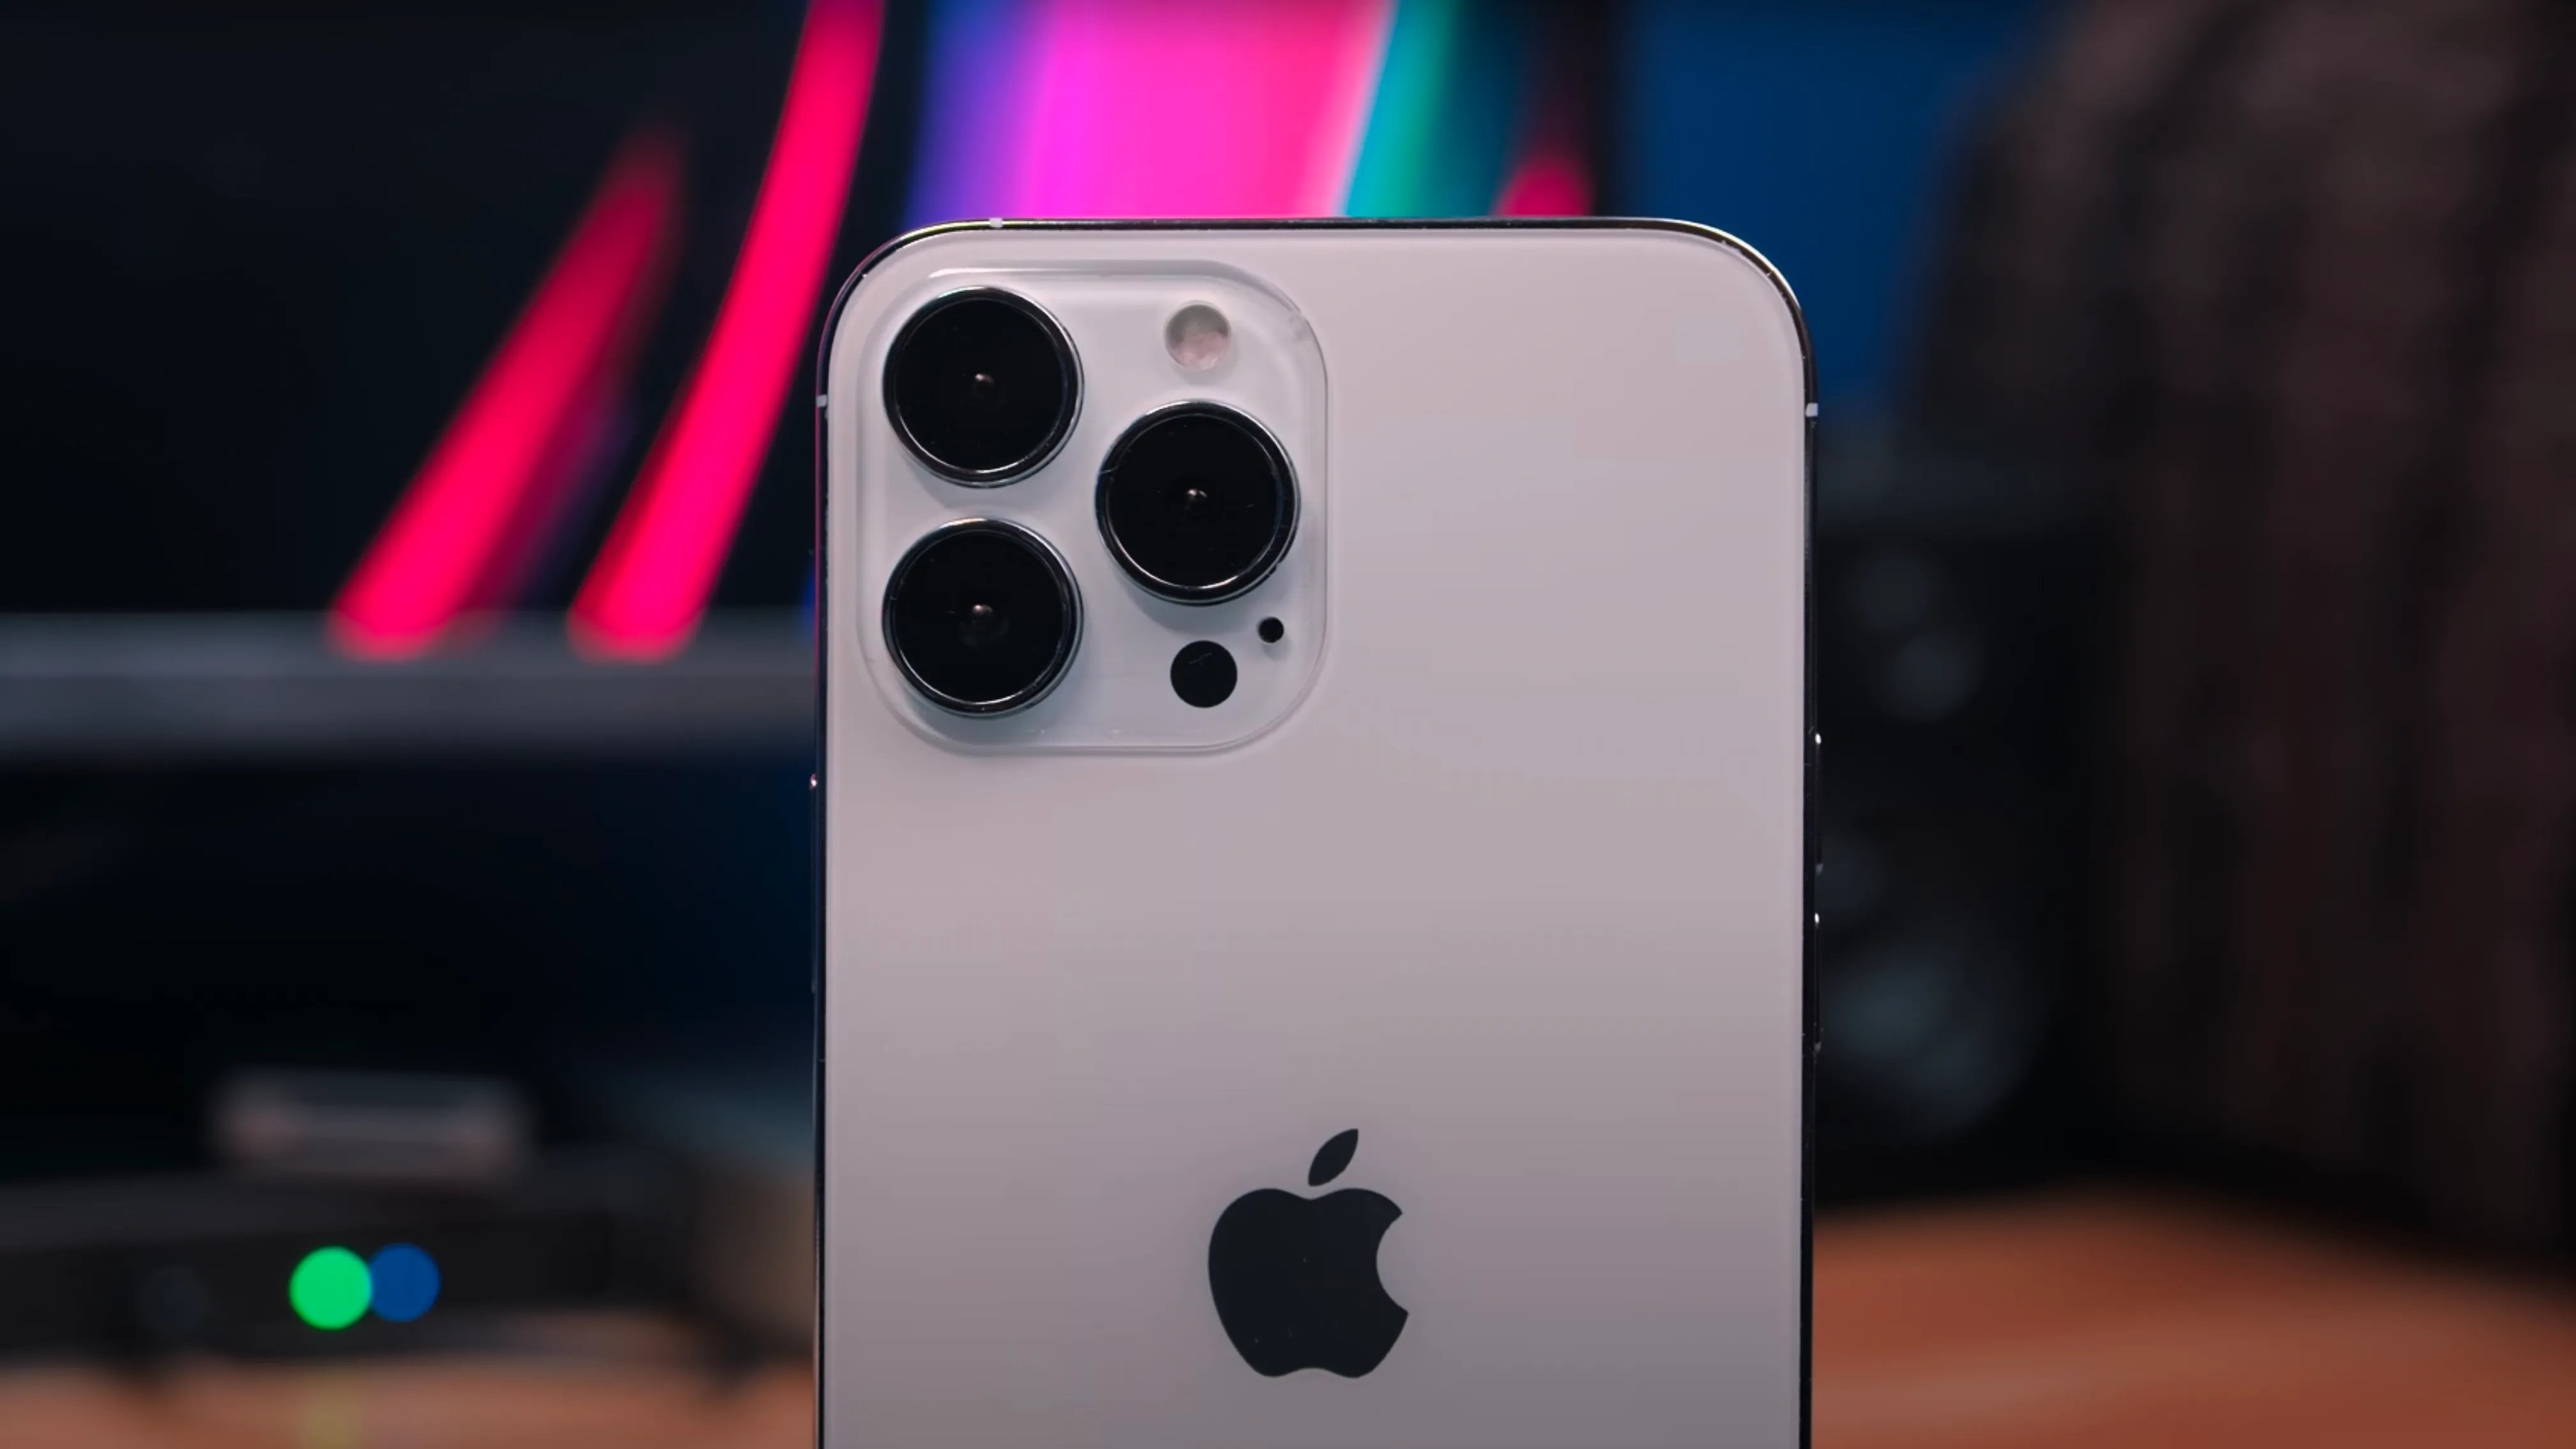 iphone-13-to-bring-portrait-video-mode-prores-video-format-report